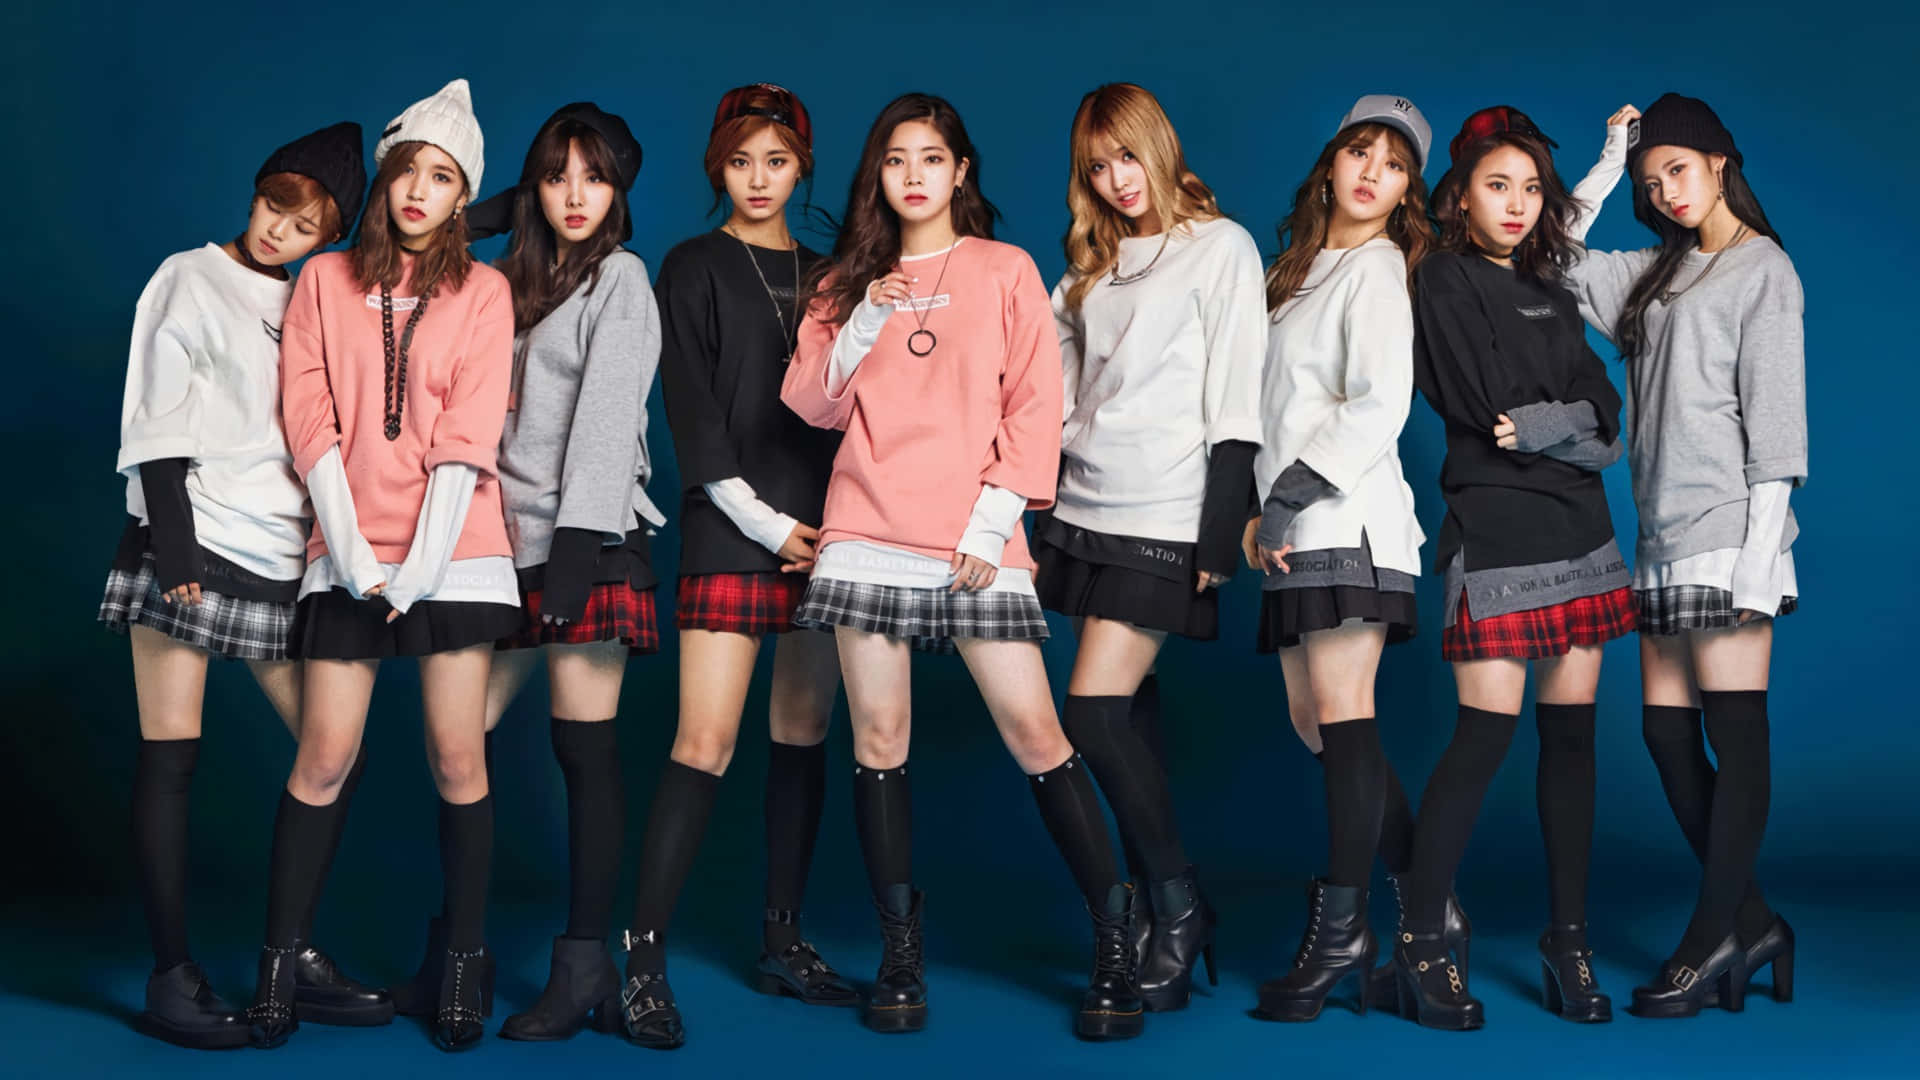 The nine show-stopping members of Twice